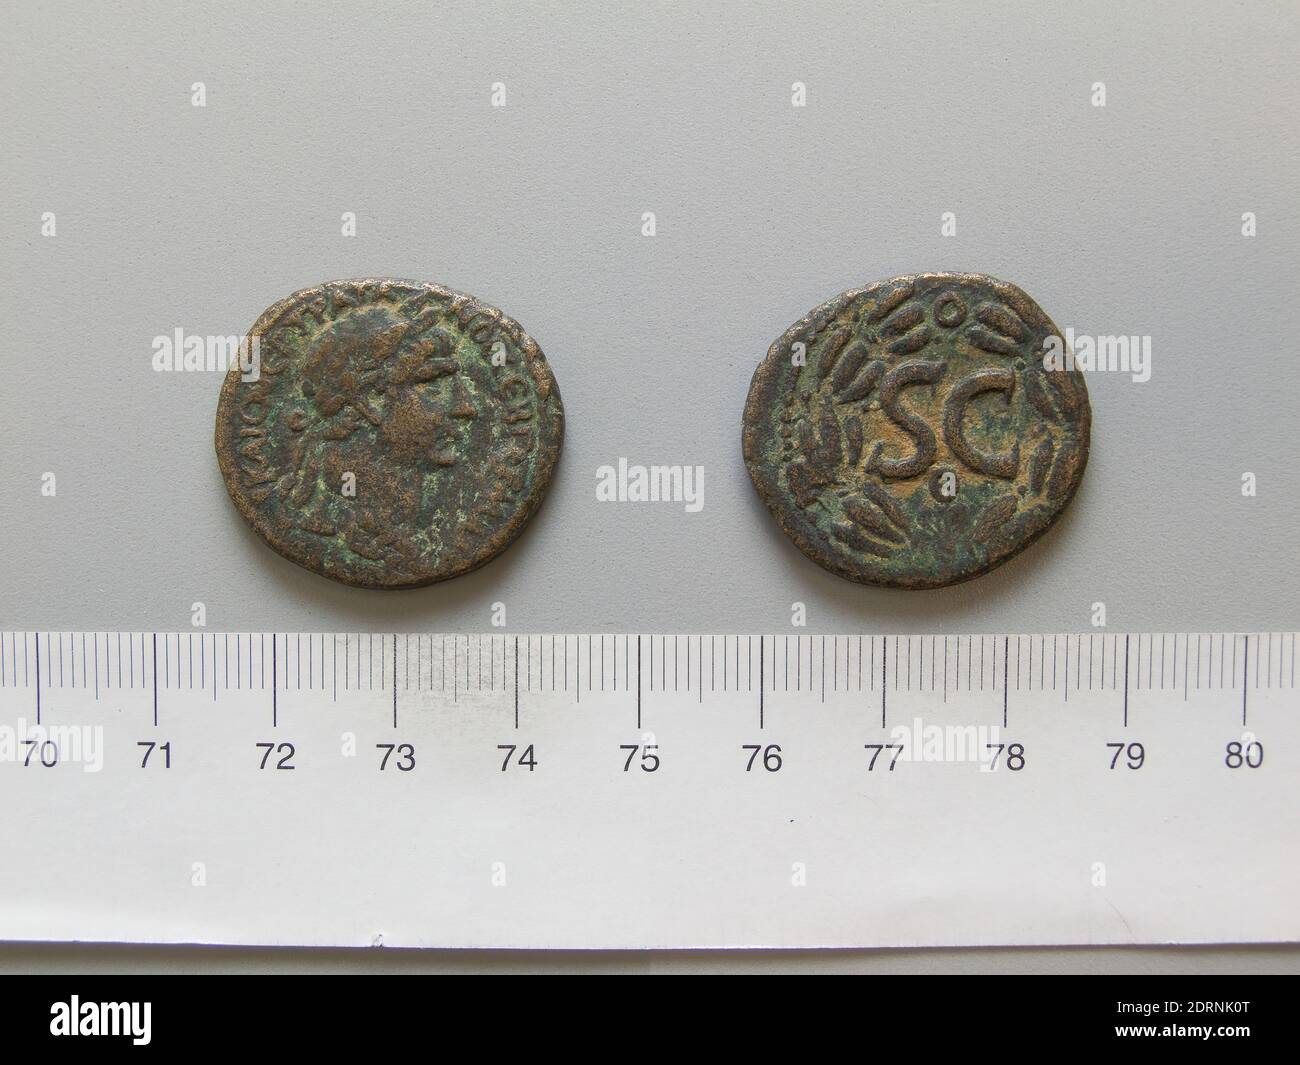 Ruler: Trajan, Emperor of Rome, A.D. 53–117, ruled 98–117, Mint: Antioch, Dupondius of Trajan, Emperor of Rome from Antioch, 98–117, copper, 12.41 g, 1:00, 28.5 mm, Made in Antioch, Seleucis and Pieria, Roman, 2nd century, Numismatics Stock Photo